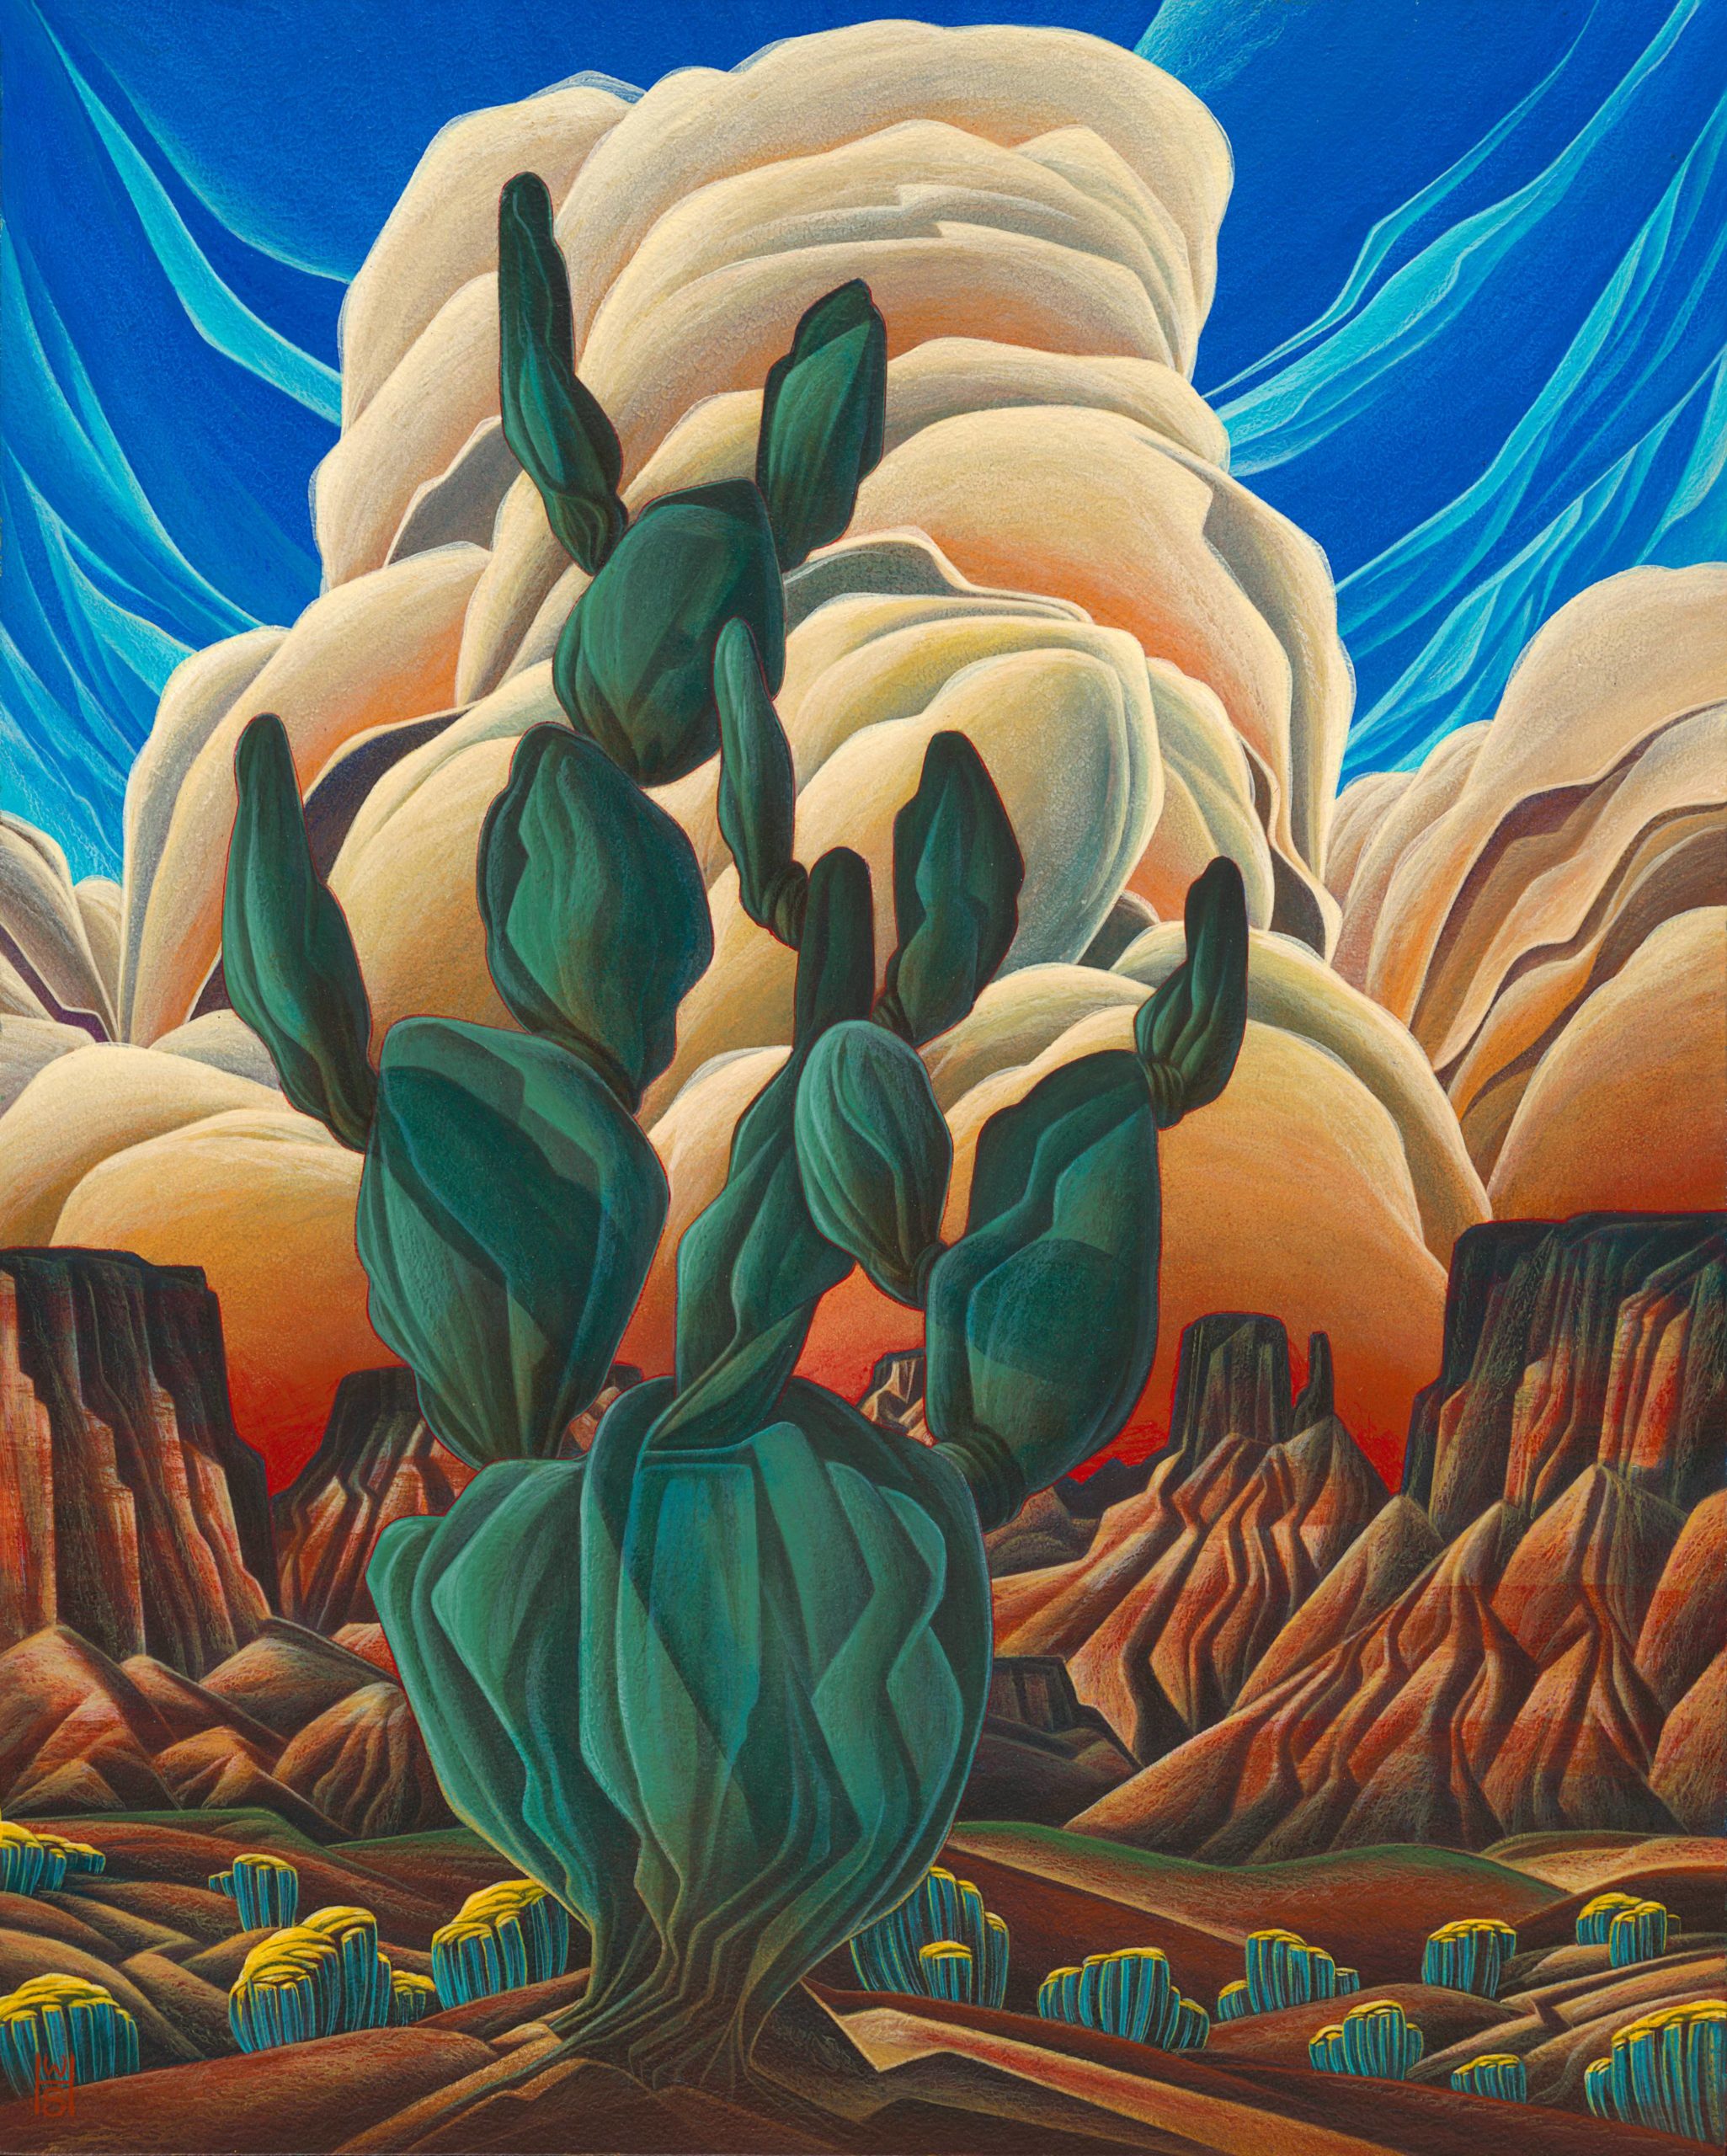 Western art - William Haskell, "Southwest Sentinel," 2022, Acrylic on panel, 20 x 16 inches, Image courtesy of the artist